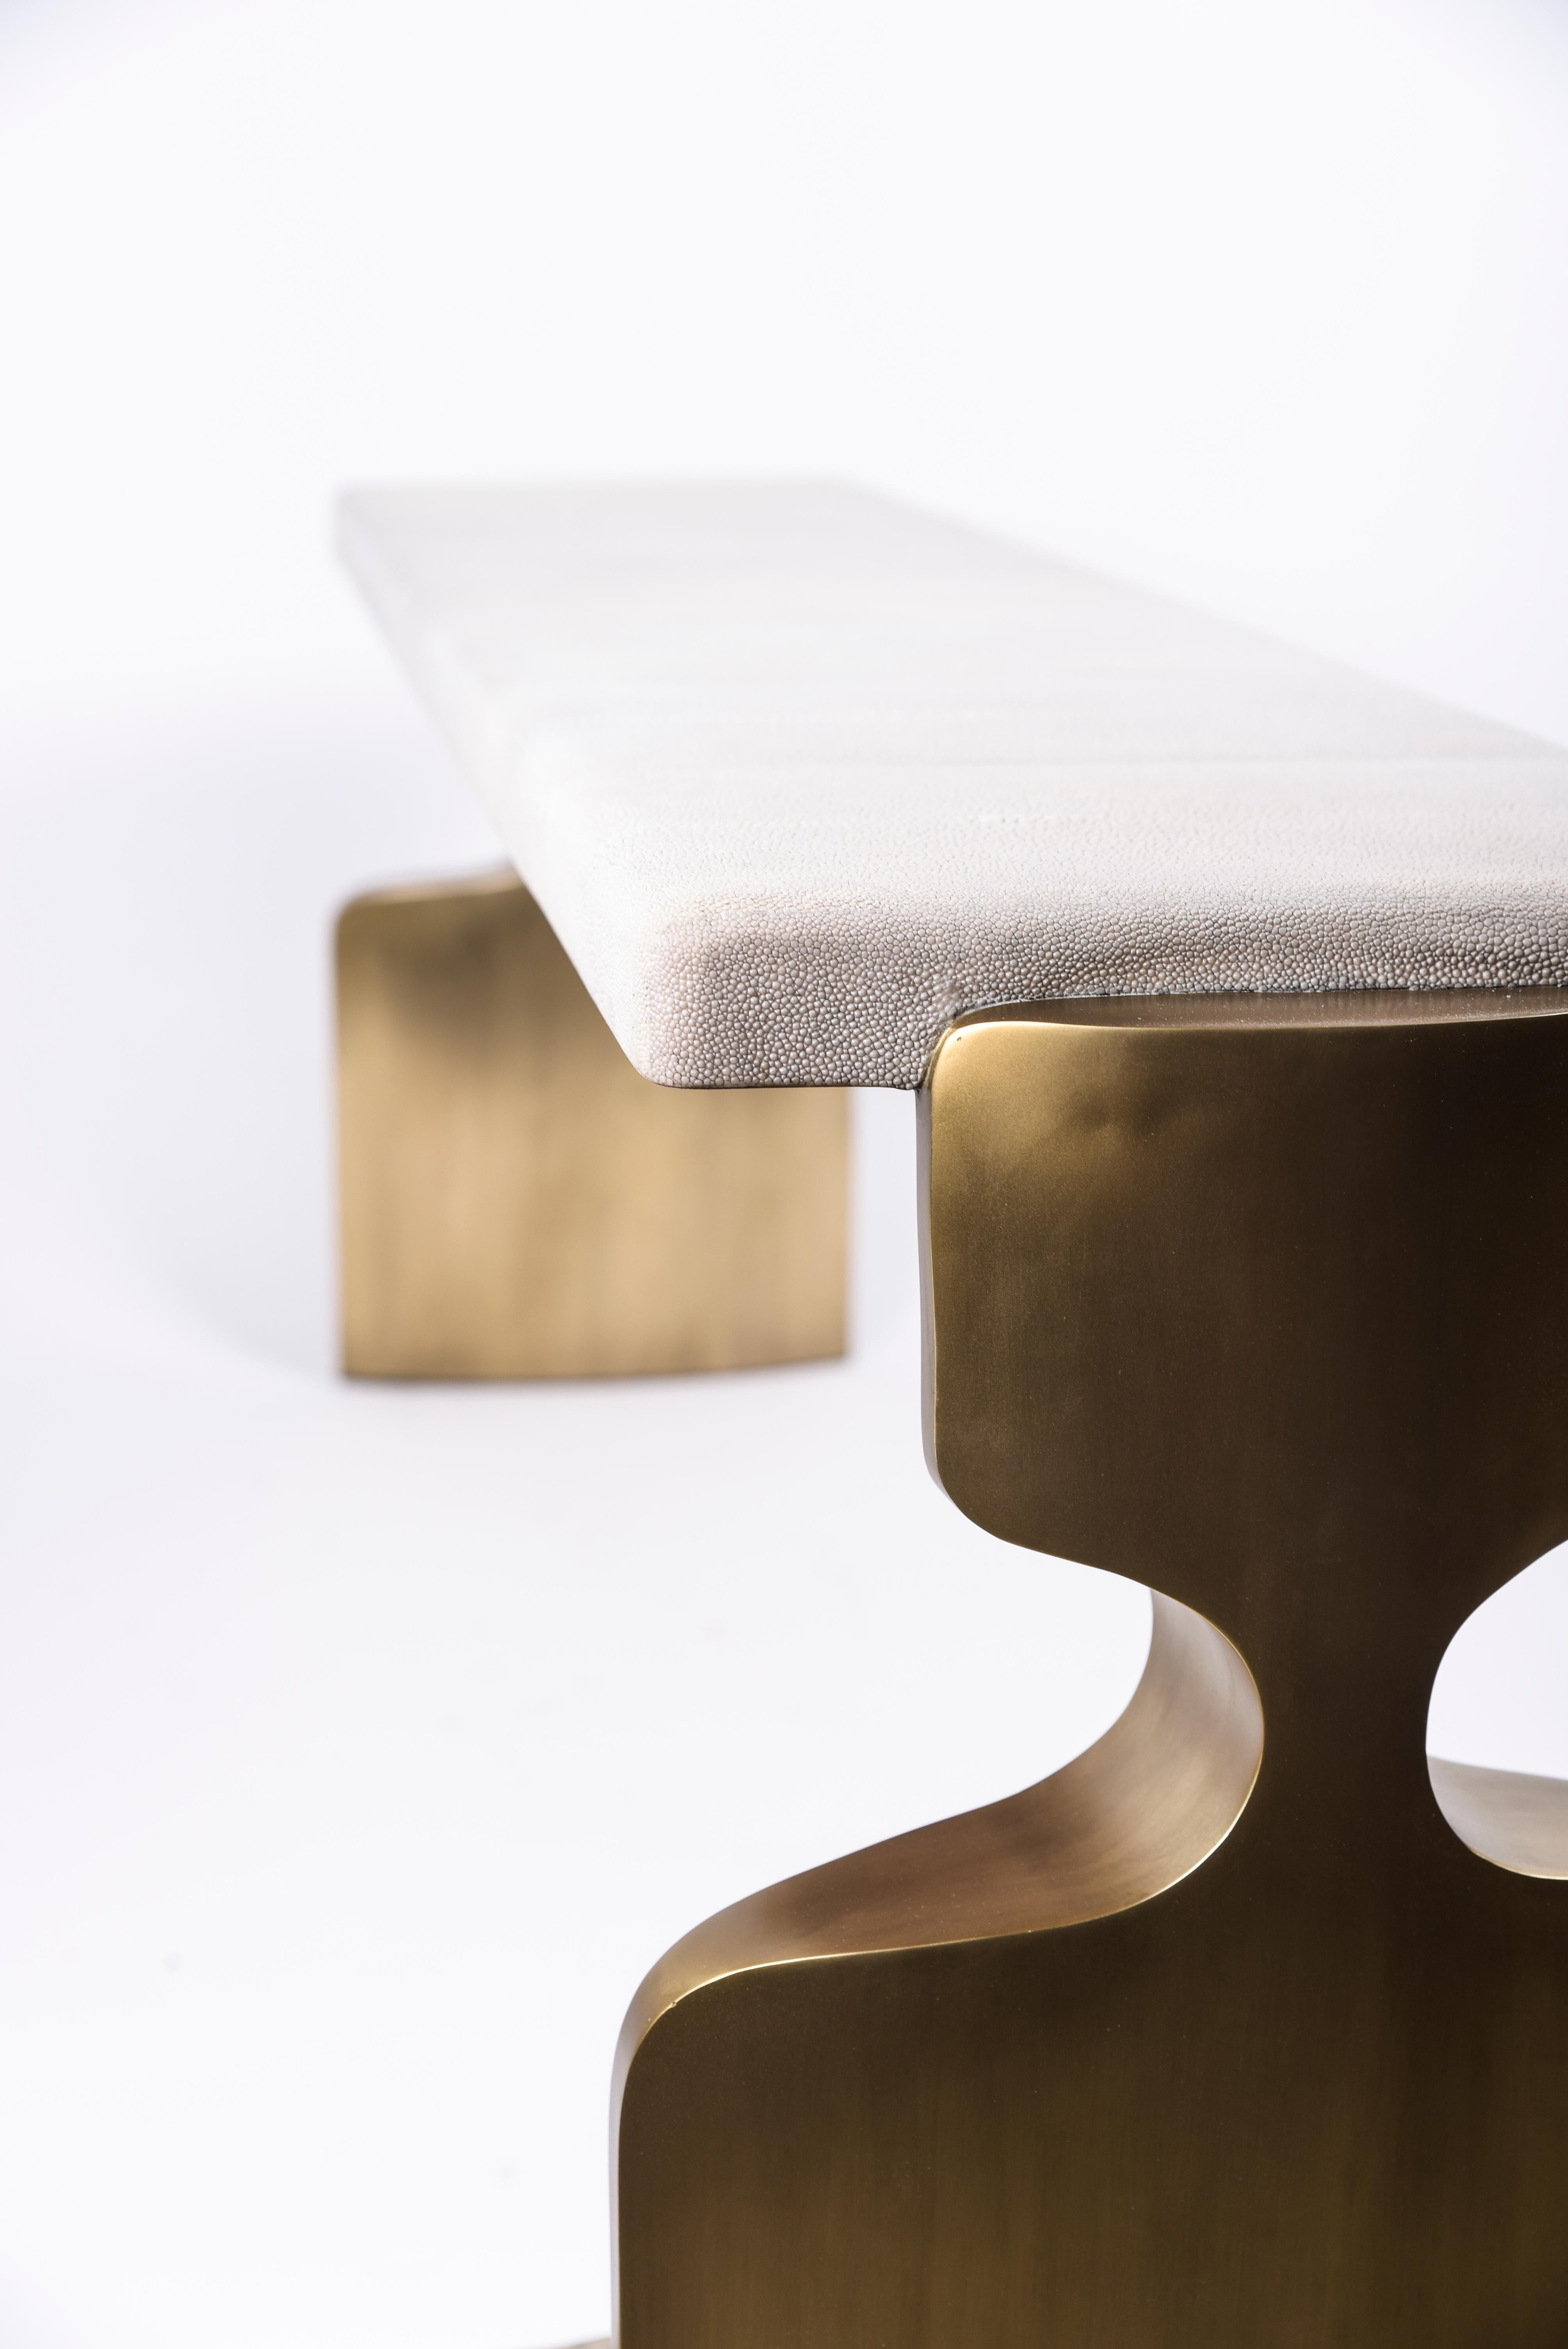 The Carmen bench is a stunning seating piece. The cream shagreen inlaid top sits on a pair of sculptural bronze-patina brass legs that frame the piece. Custom color/sizing available on request. A stool version is also available, image at end of